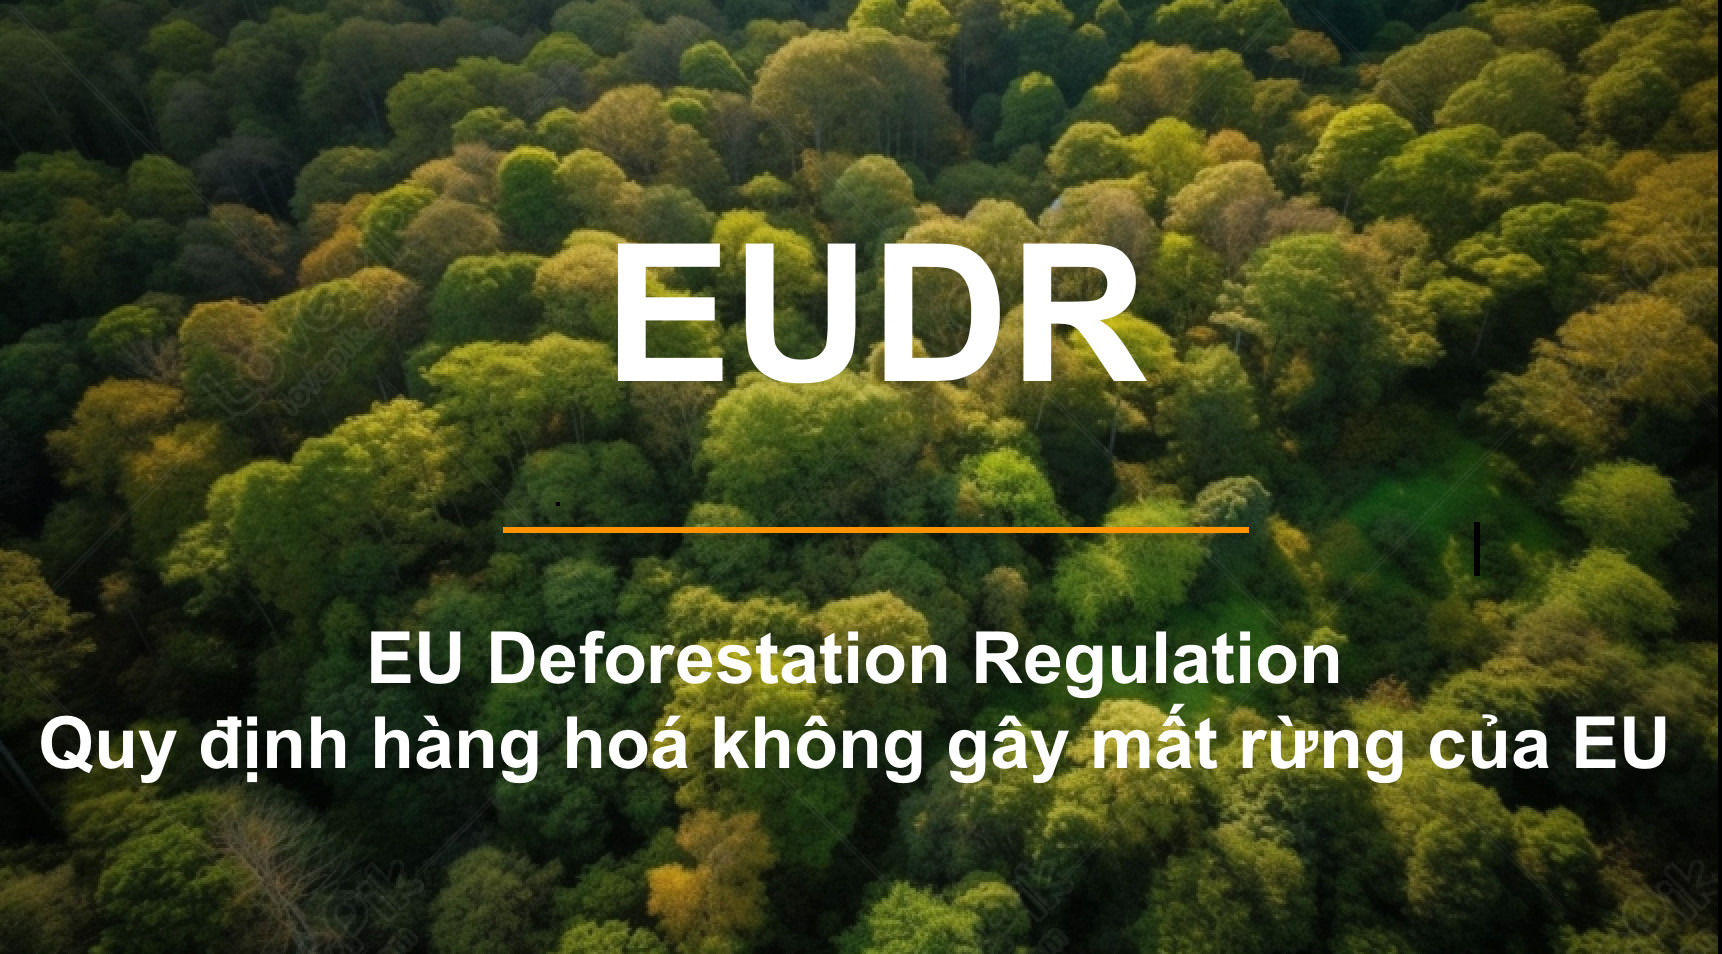 VIRI cooperate with VFCO to develop guideline for the implementation on deforestation-free agricultural commodity production meeting EUDR regulations